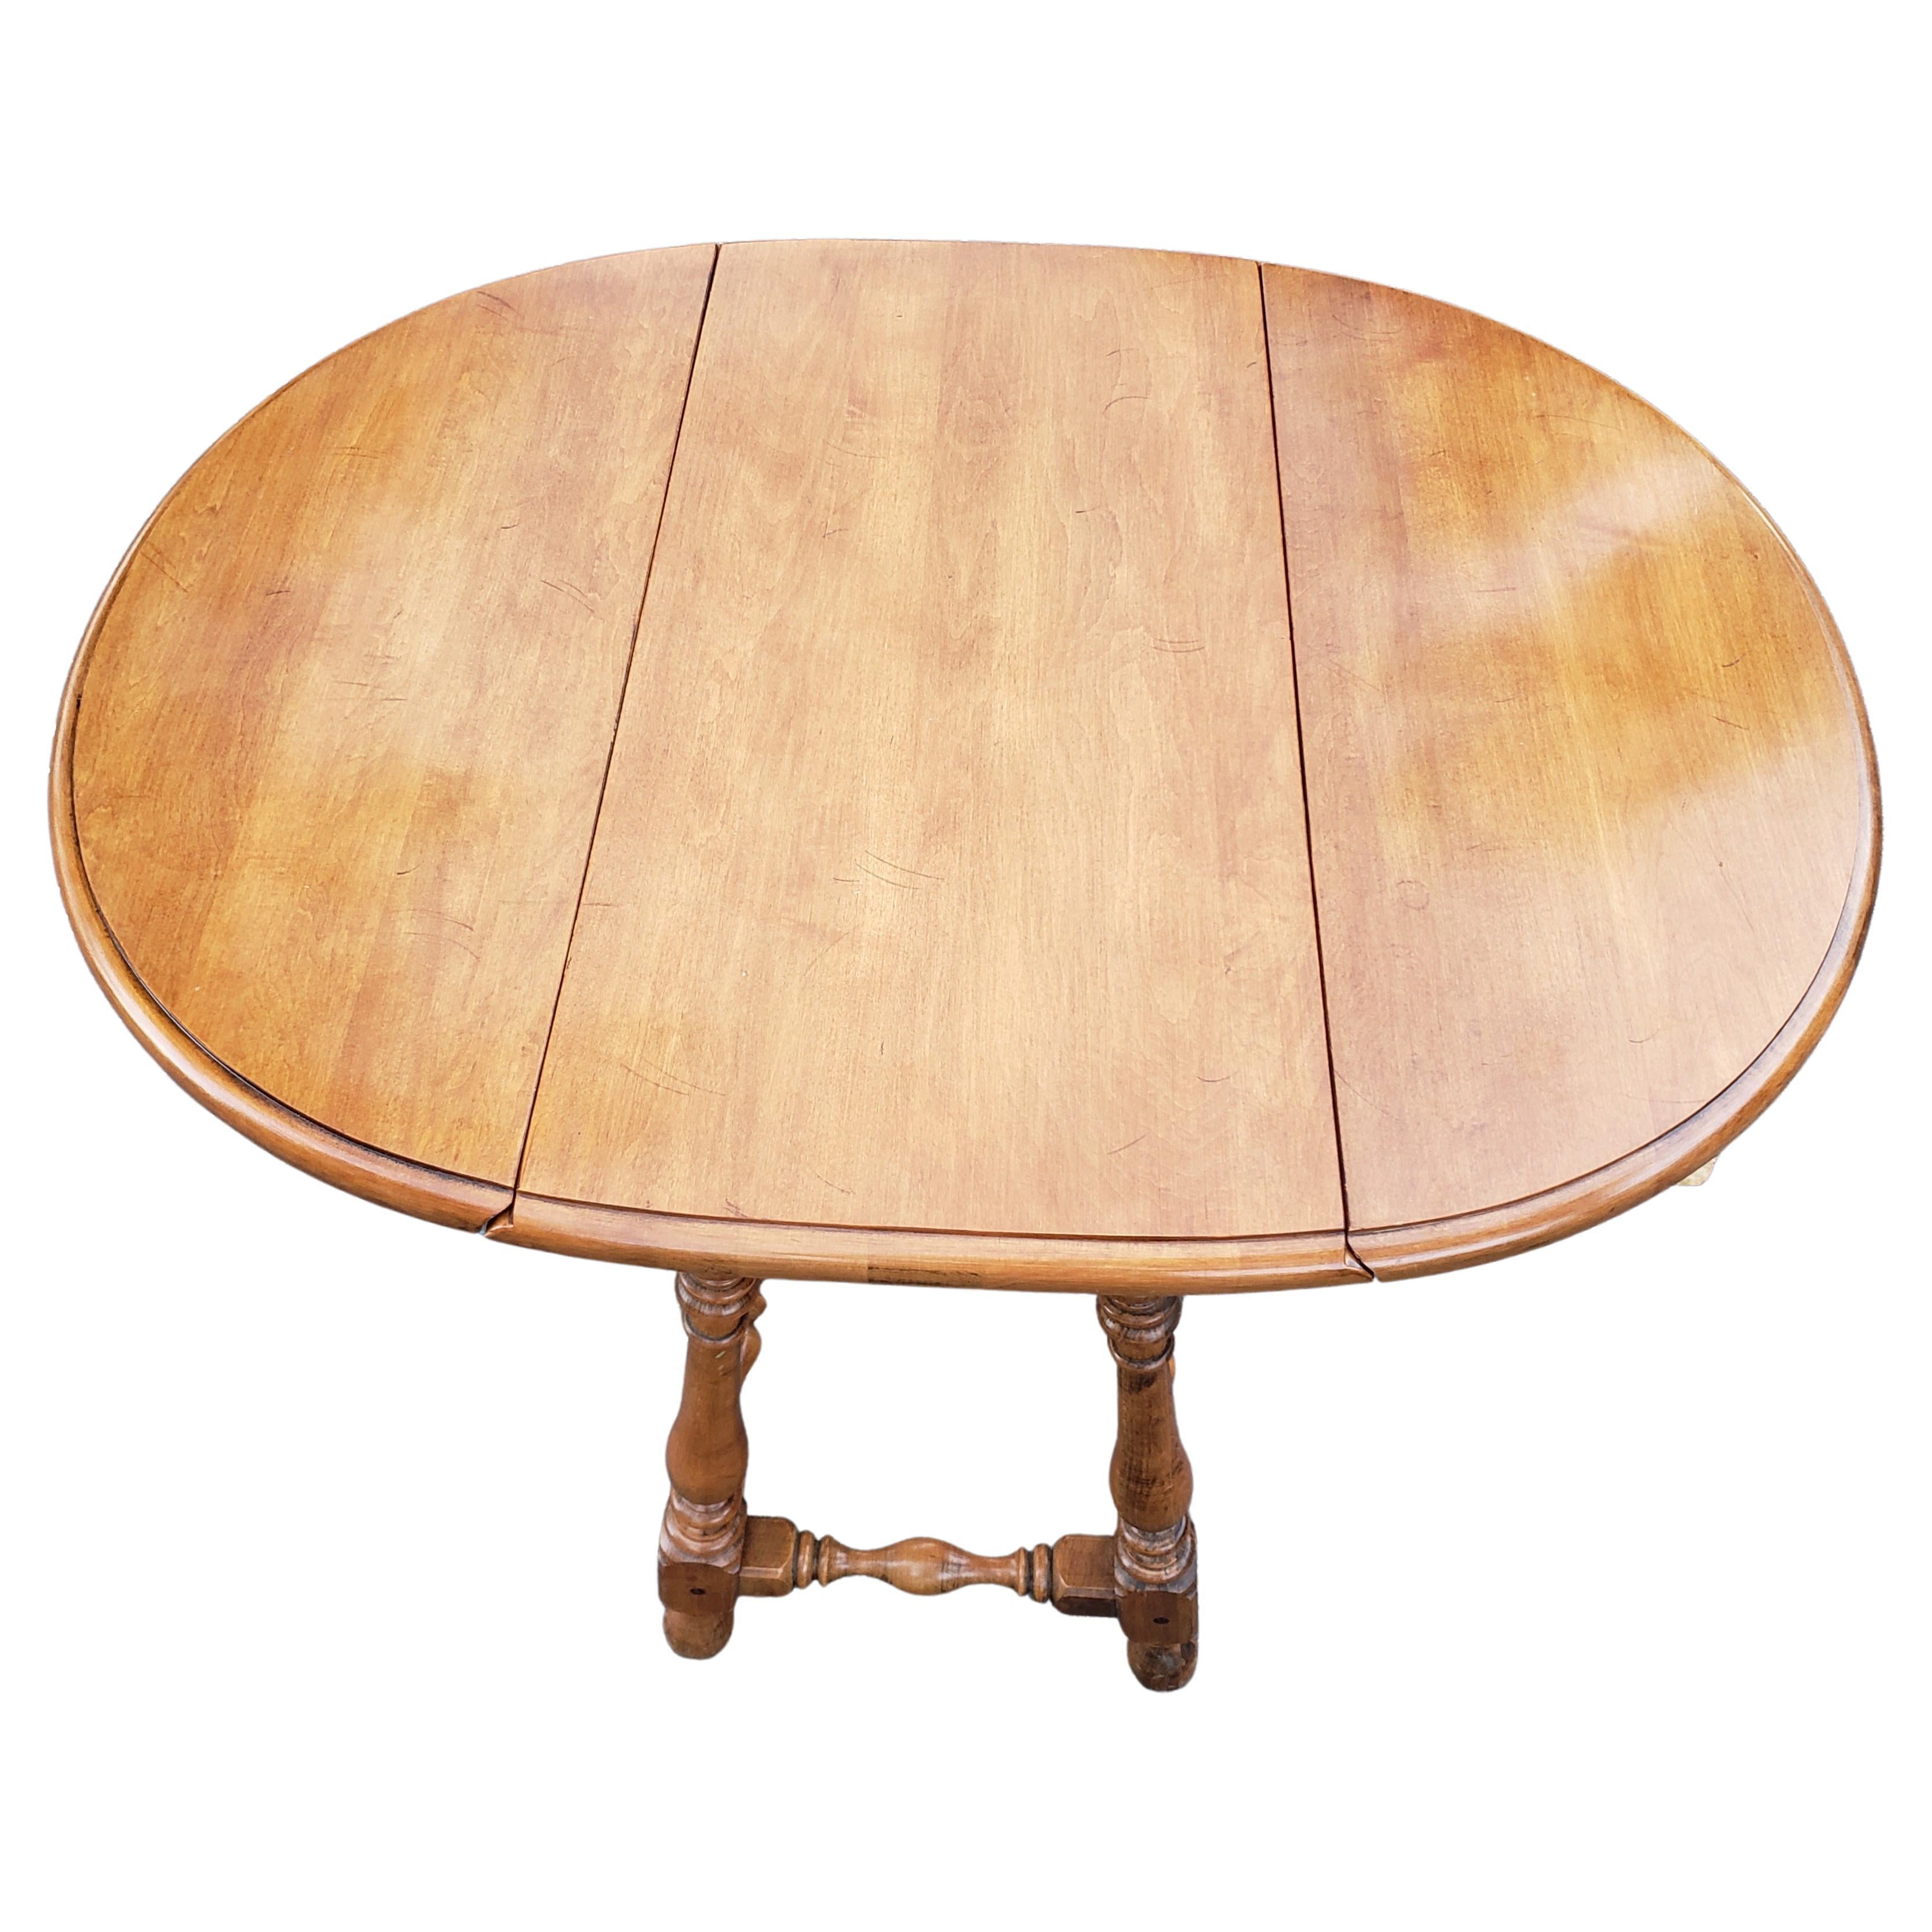 A skillfully crafted Mid-Century American Classical Maple Drop Leaf Side Table in great vintage condition. Measures 34